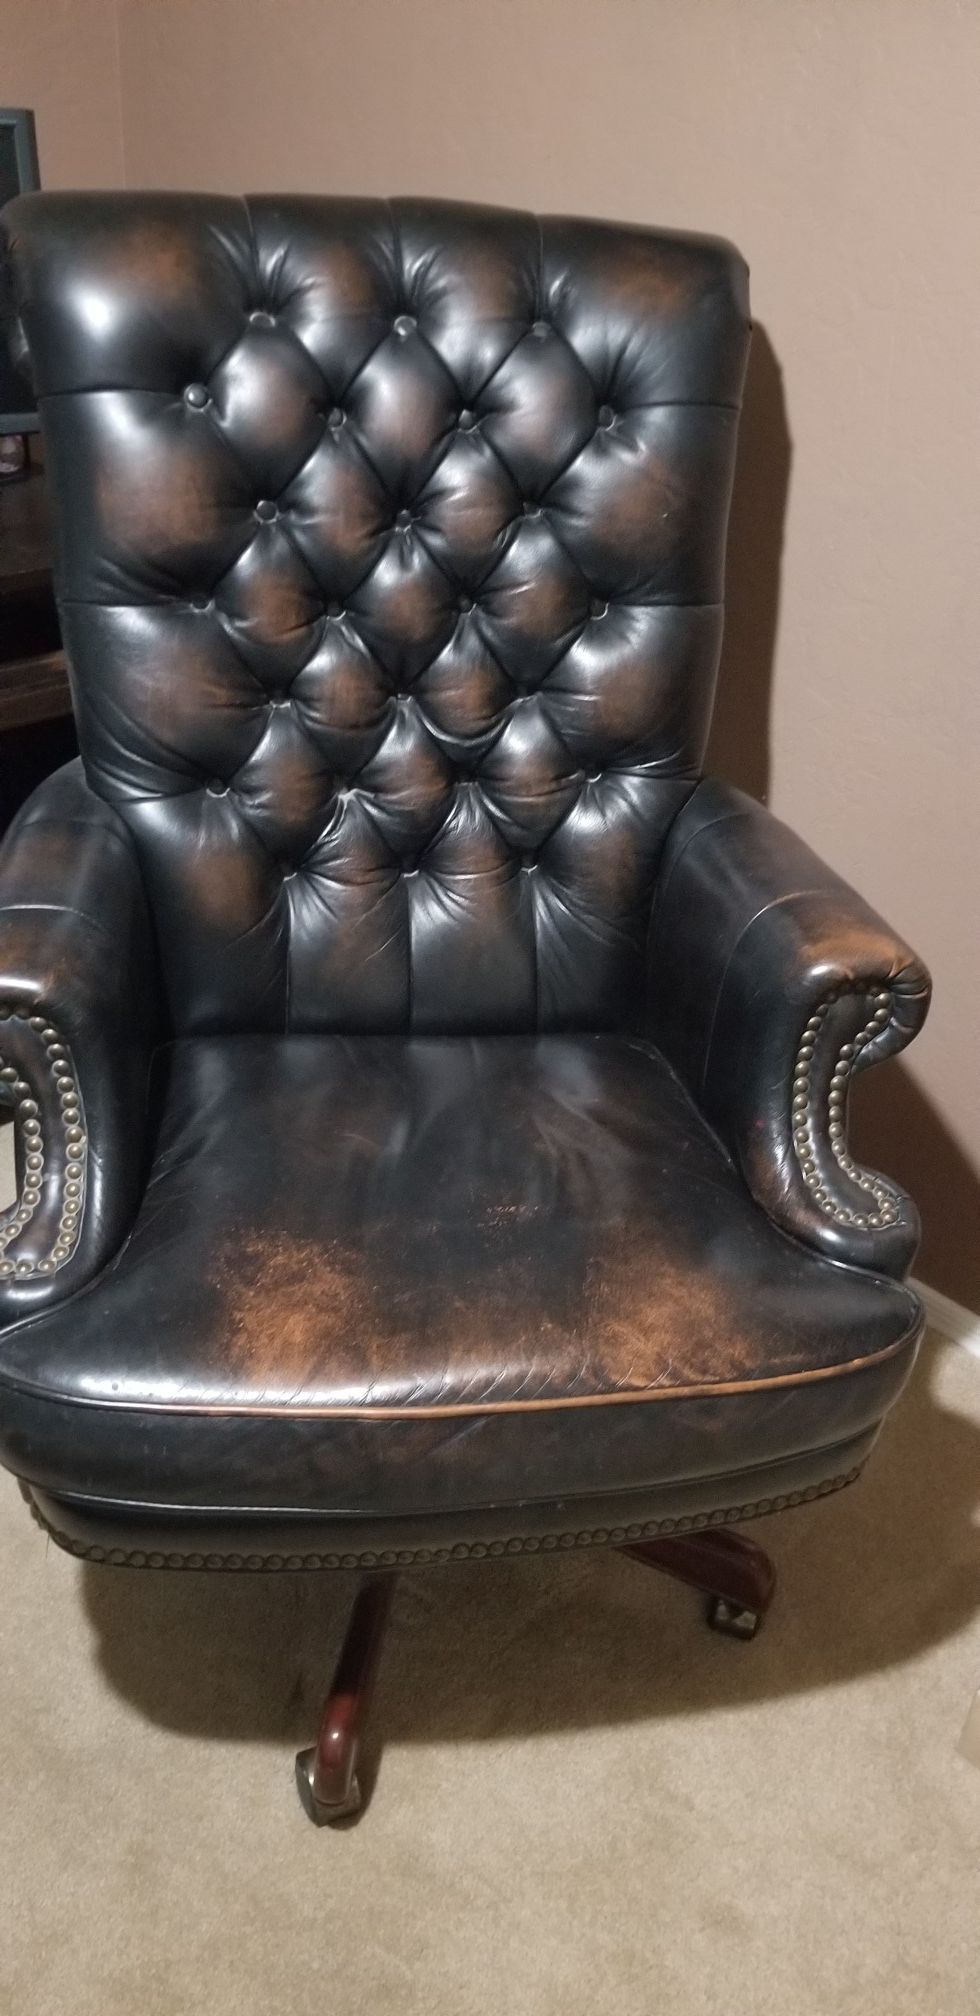 Bradington Young office chair. Leather